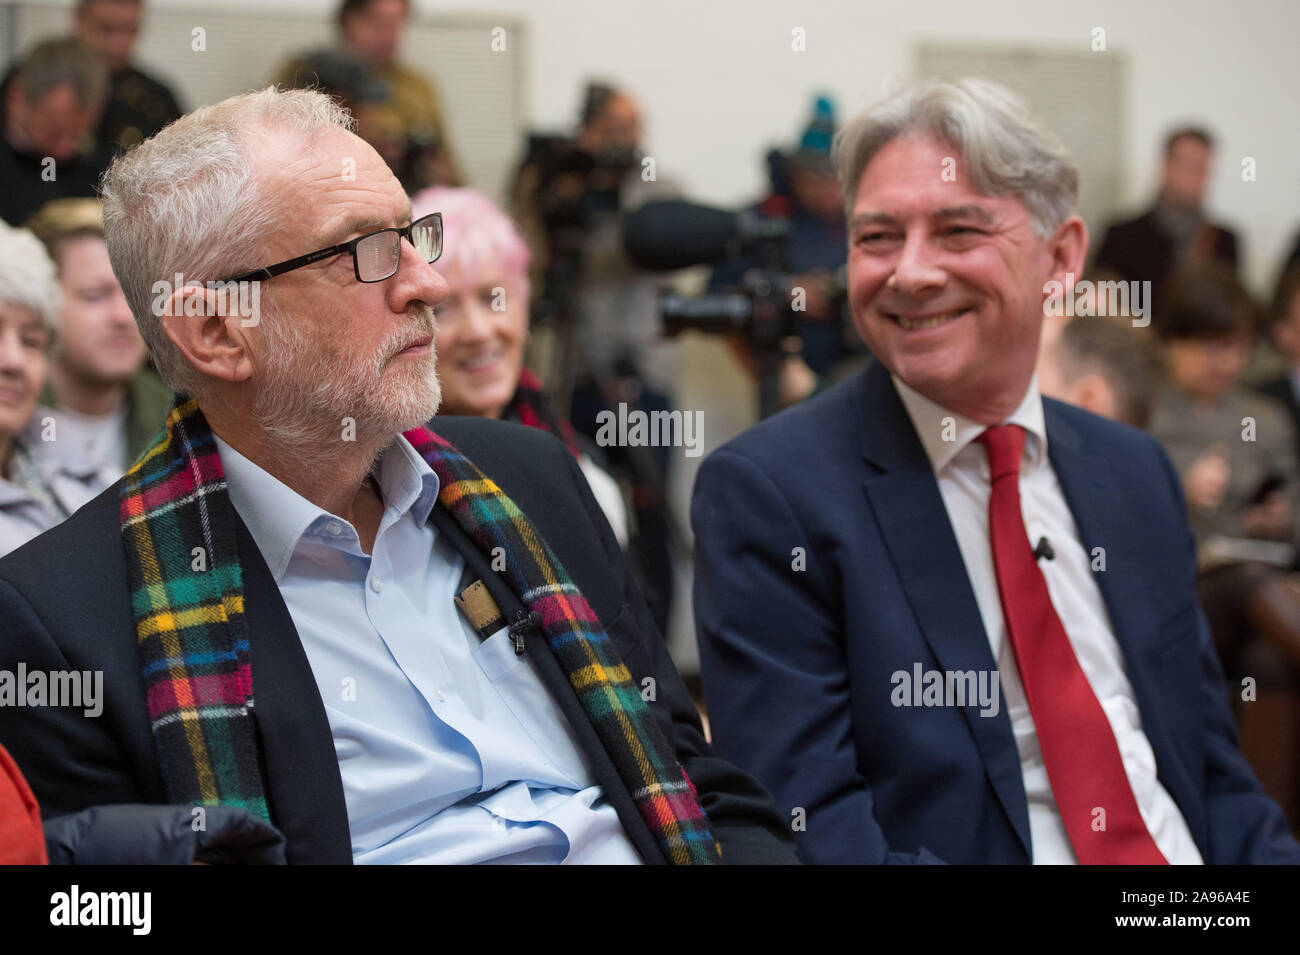 Glasgow, UK. 13th Nov, 2019. Pictured: Pictured: (left) Jeremy Corbyn MP - Leader of the Labour Party, (right) Richard Leonard MSP - Leader of the Scottish Labour Party. Labour Leader Jeremy Corbyn tours key constituencies in Scotland as part of the biggest people-powered campaign in the history of our country. Jeremy Corbyn addresses Labour activists and campaign across key seats in Scotland alongside Scottish Labour candidates. Credit: Colin Fisher/Alamy Live News Stock Photo